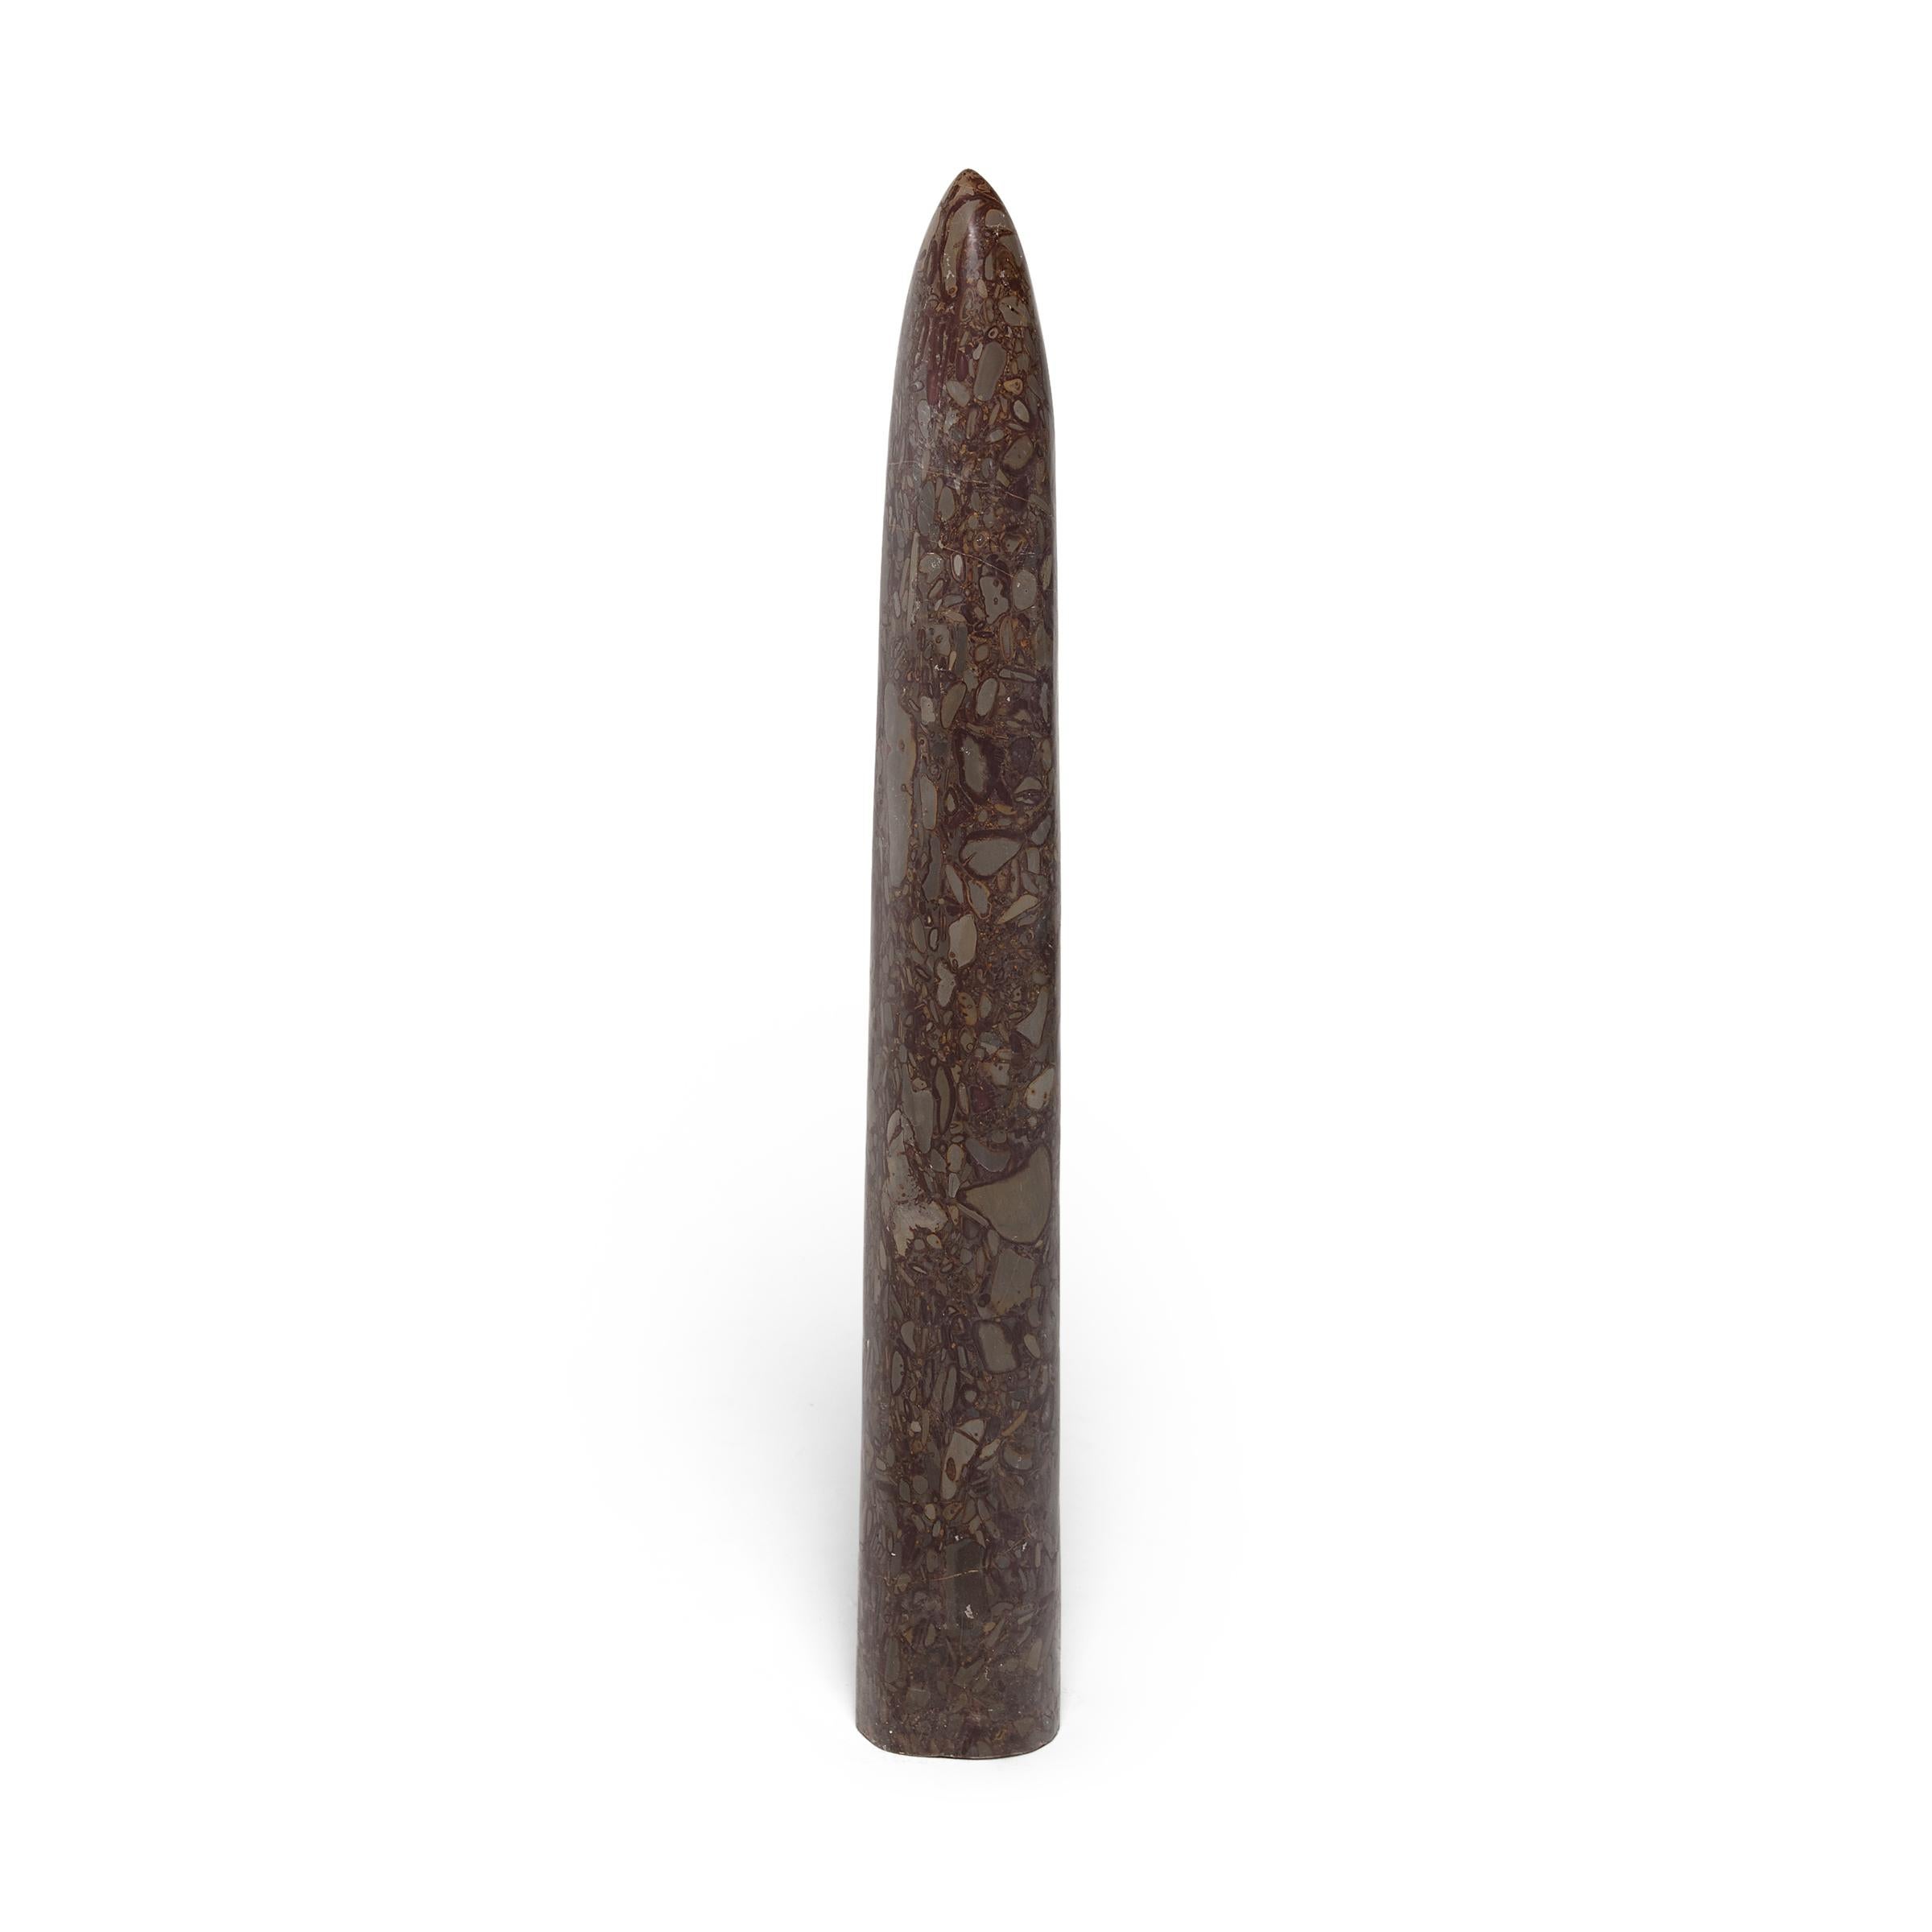 Carved from a single block of puddingstone, this stone obelisk makes for a striking addition to a garden or interior as a Minimalist modern sculpture. Though it looks like a meticulous painting, the mesmerizing pattern of puddingstone is actually